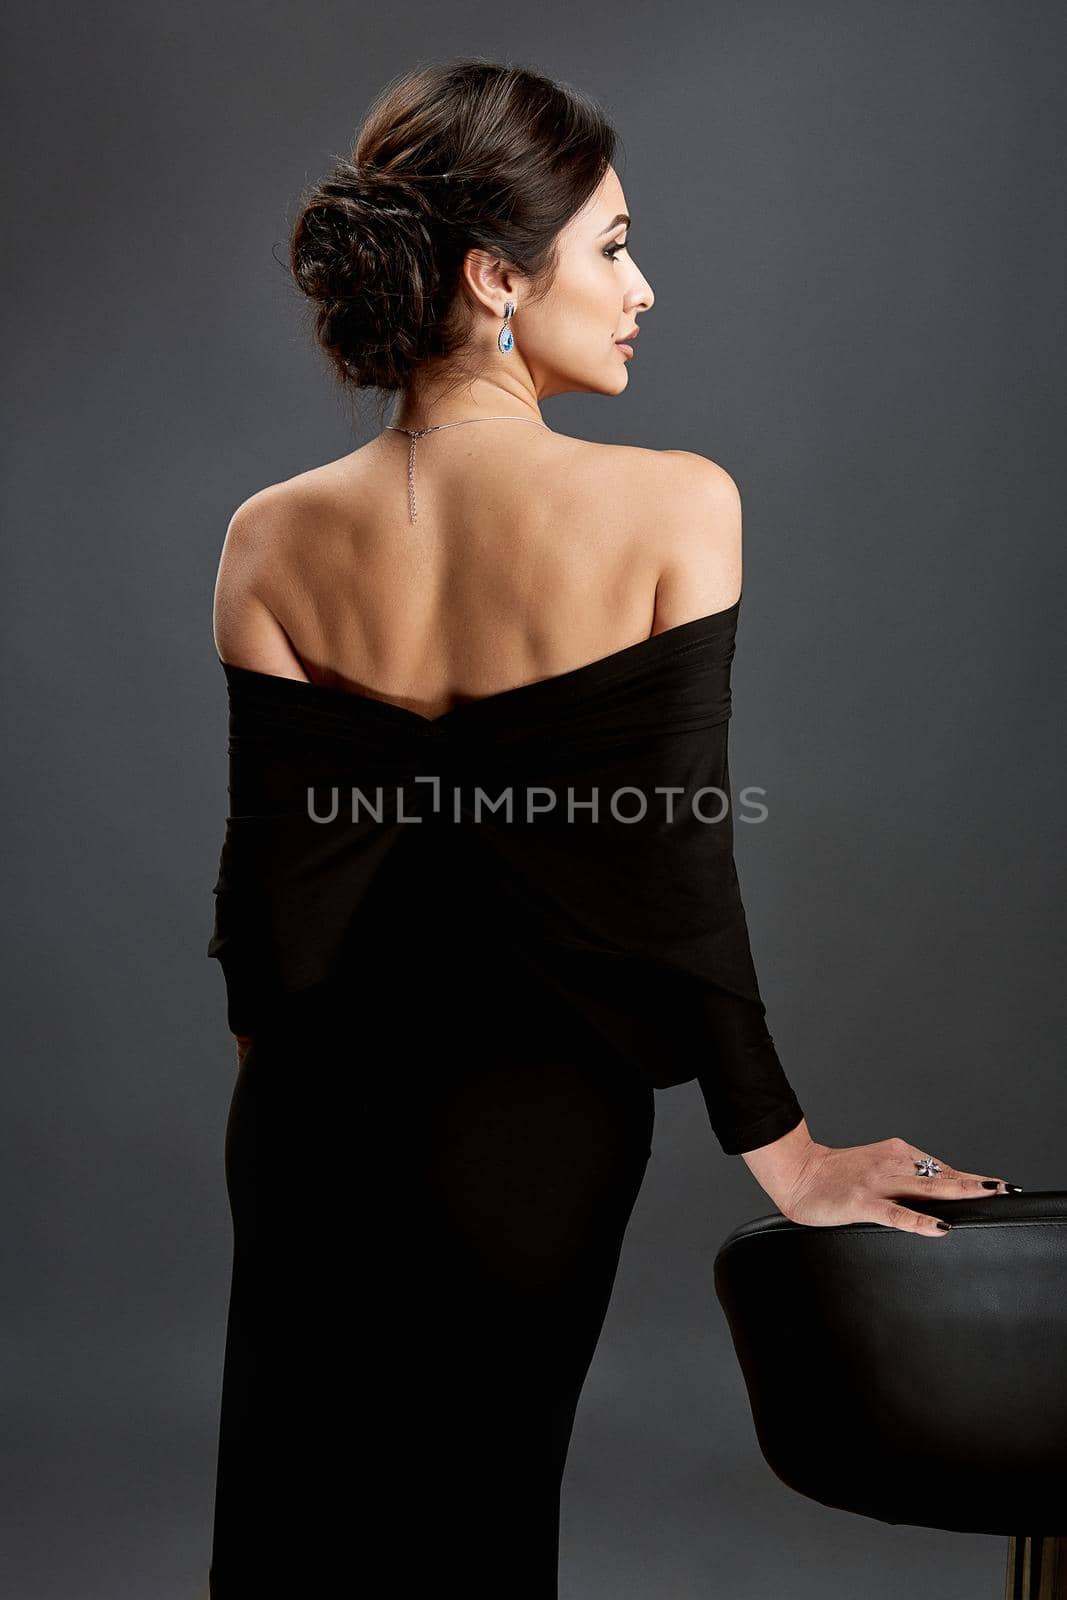 Beautiful woman standing in a black dress over gray background by nazarovsergey